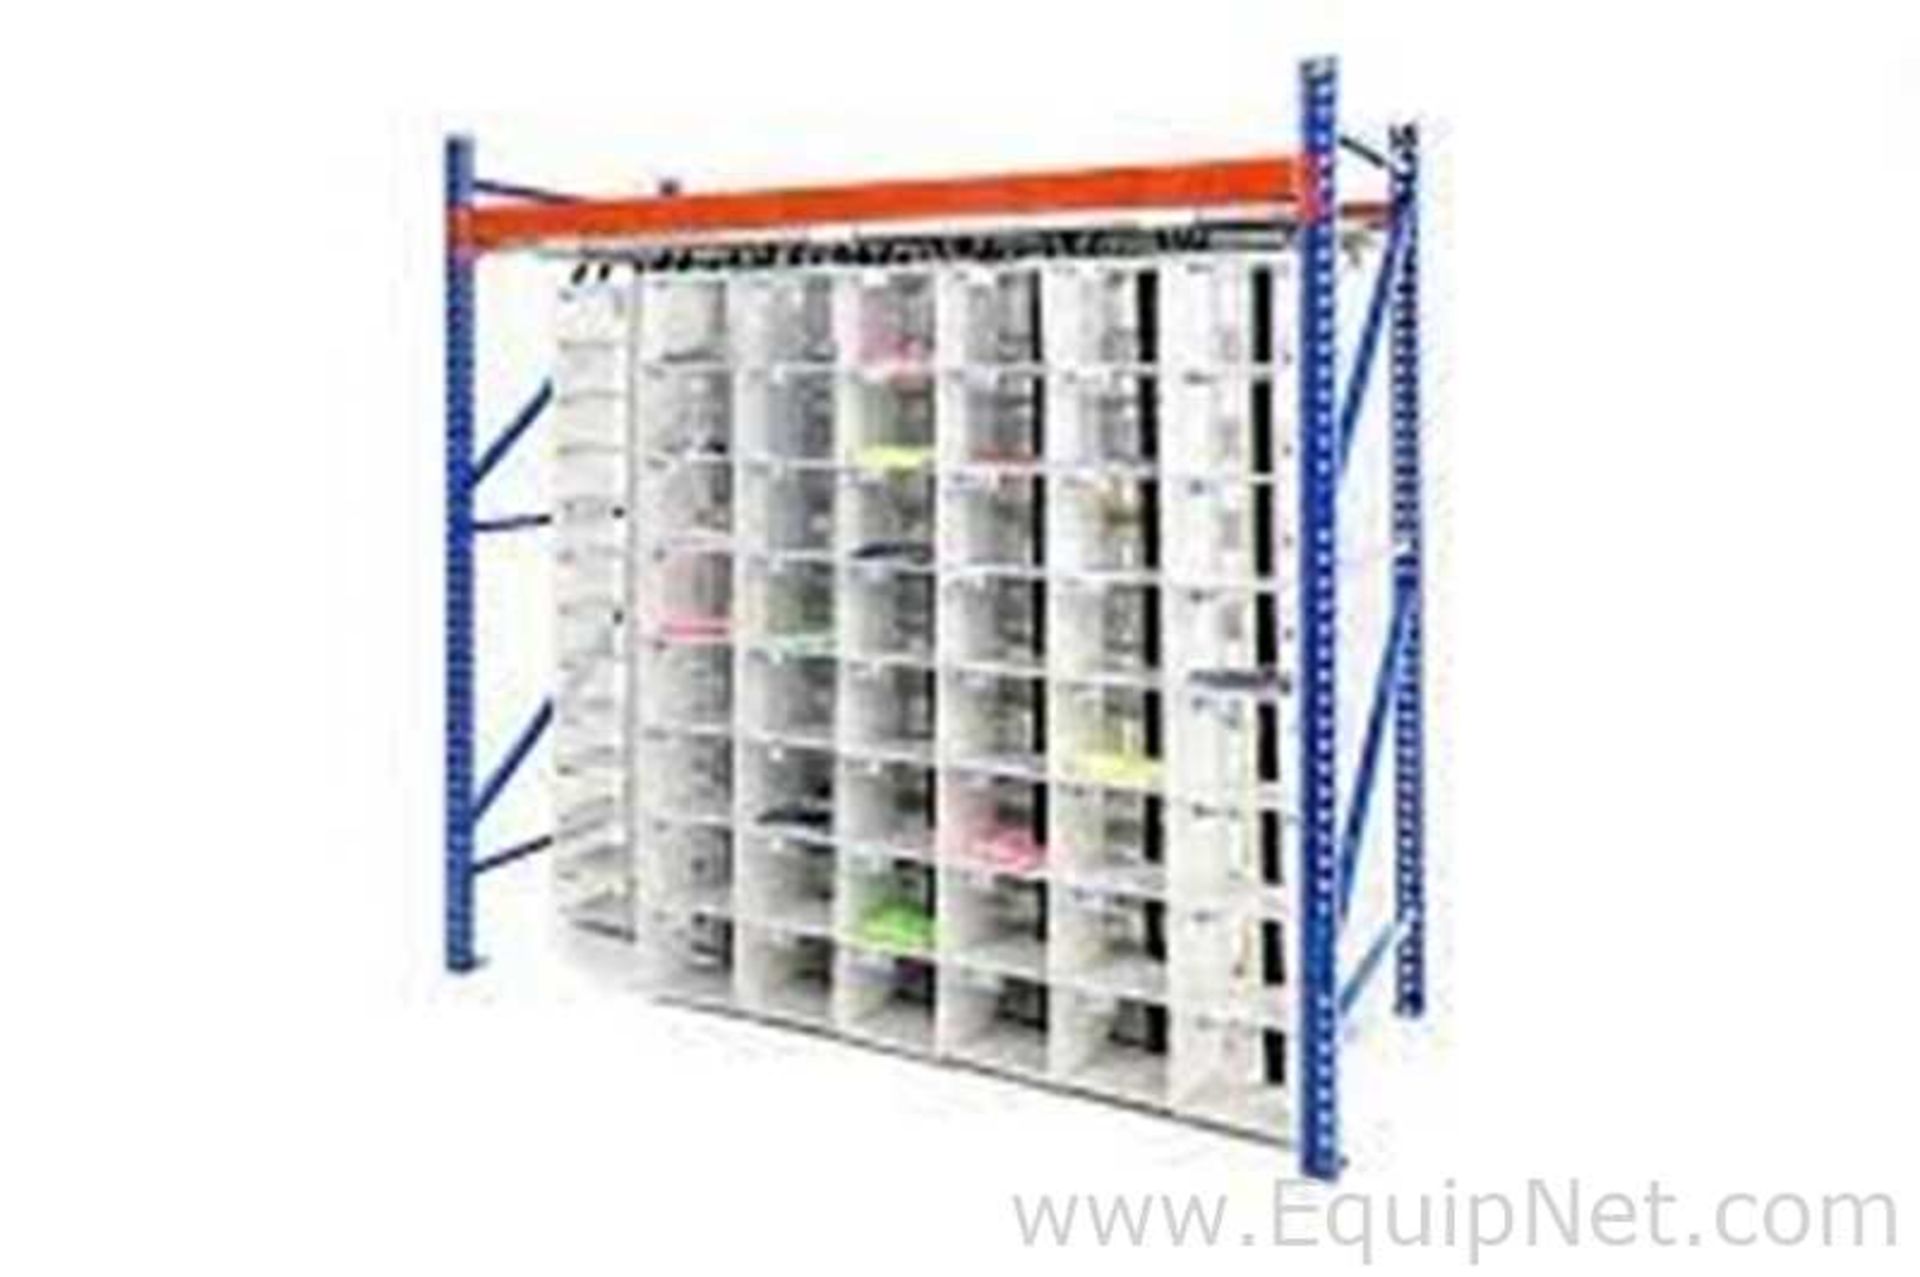 Warehouse Racking with Rolled Placement - Image 2 of 2